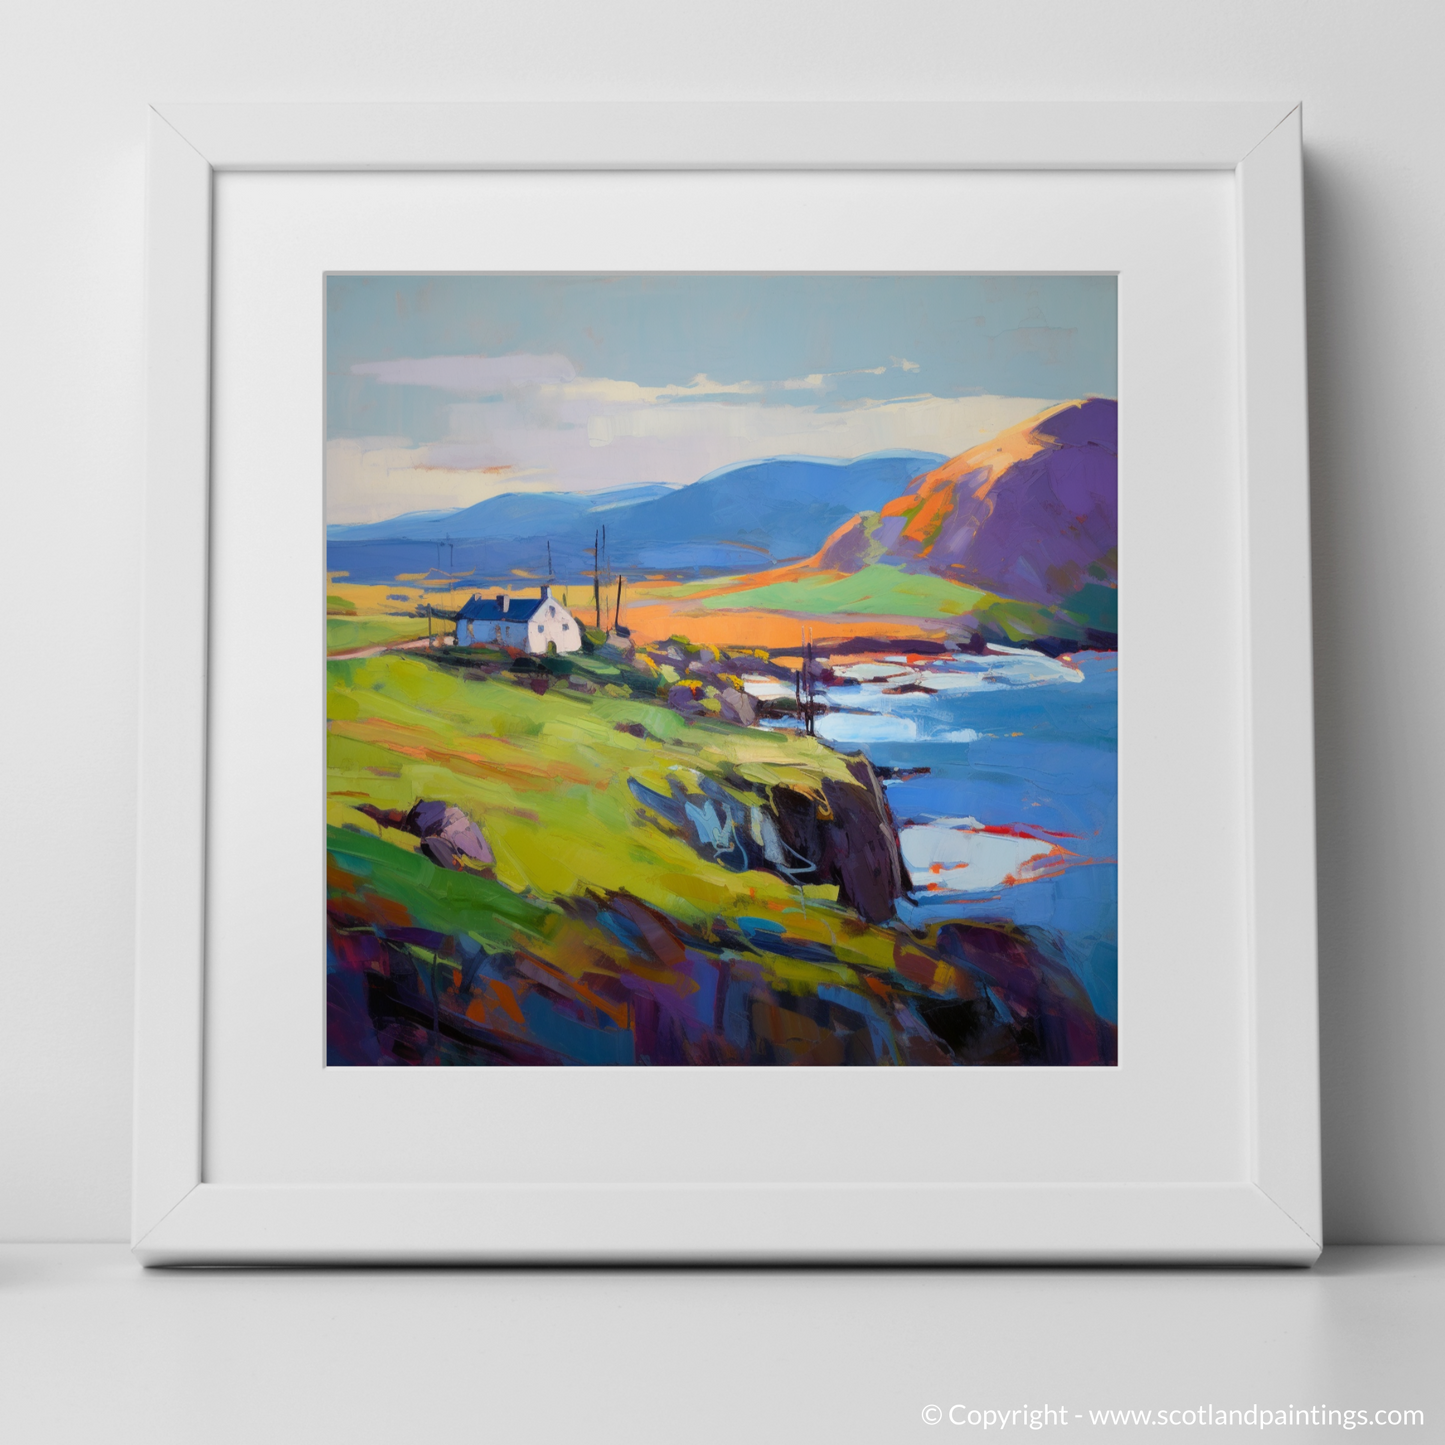 Shetland Summer Splendour: An Expressionist Ode to Scotland's Northern Isles